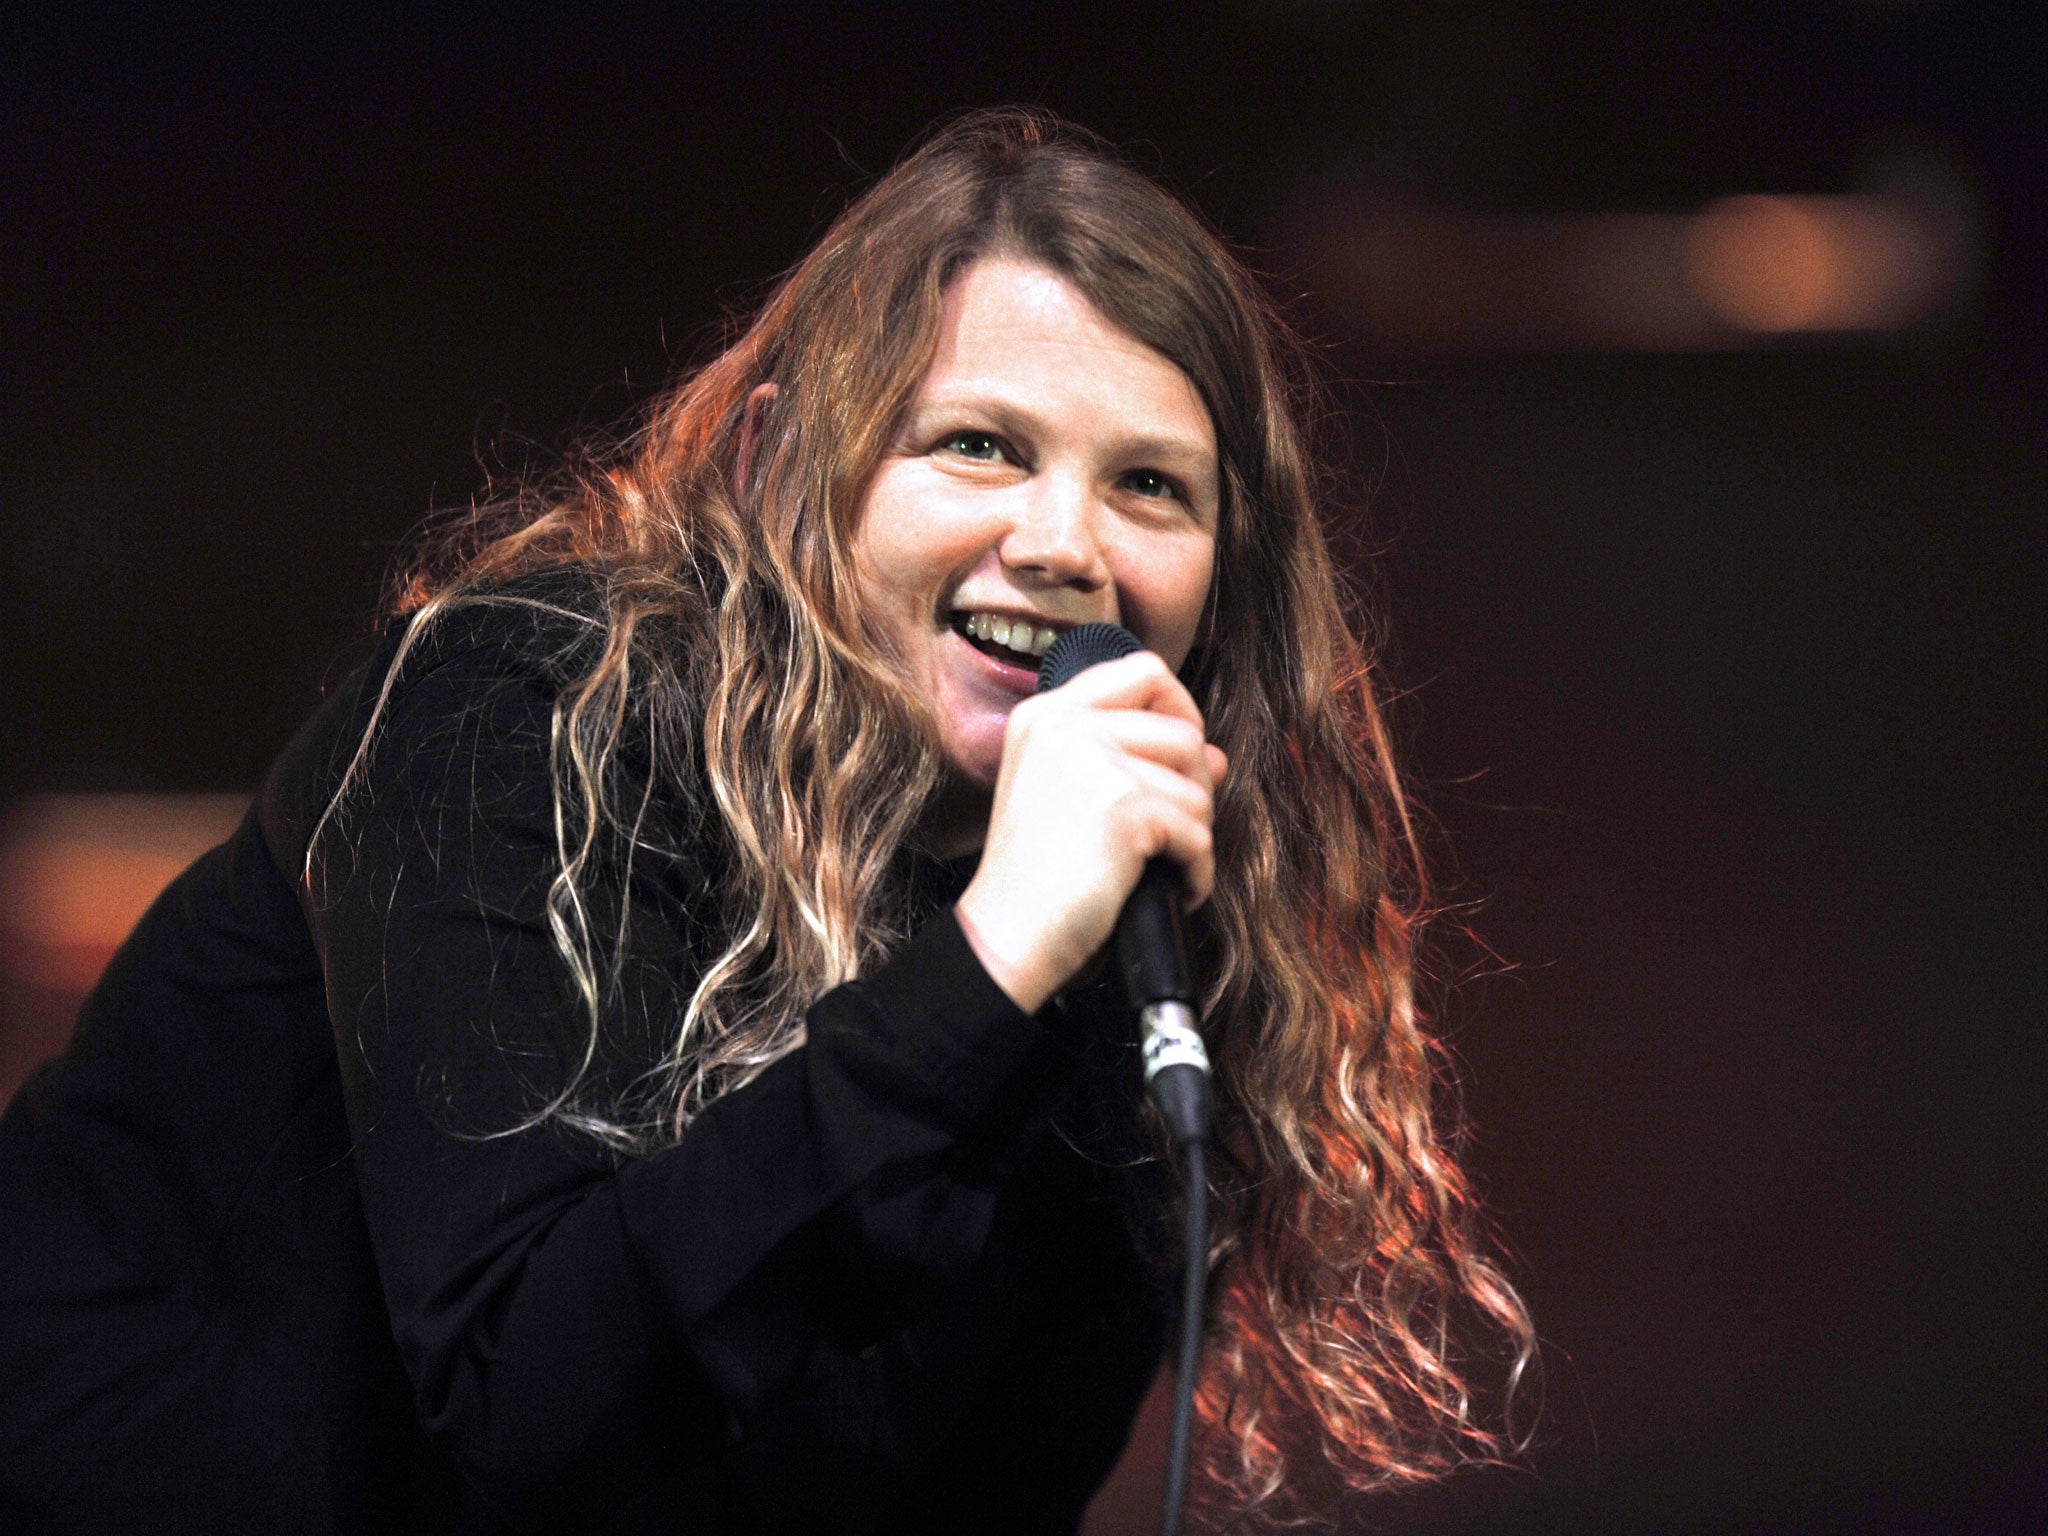 Kate Tempest performing on the stage in France in 2014